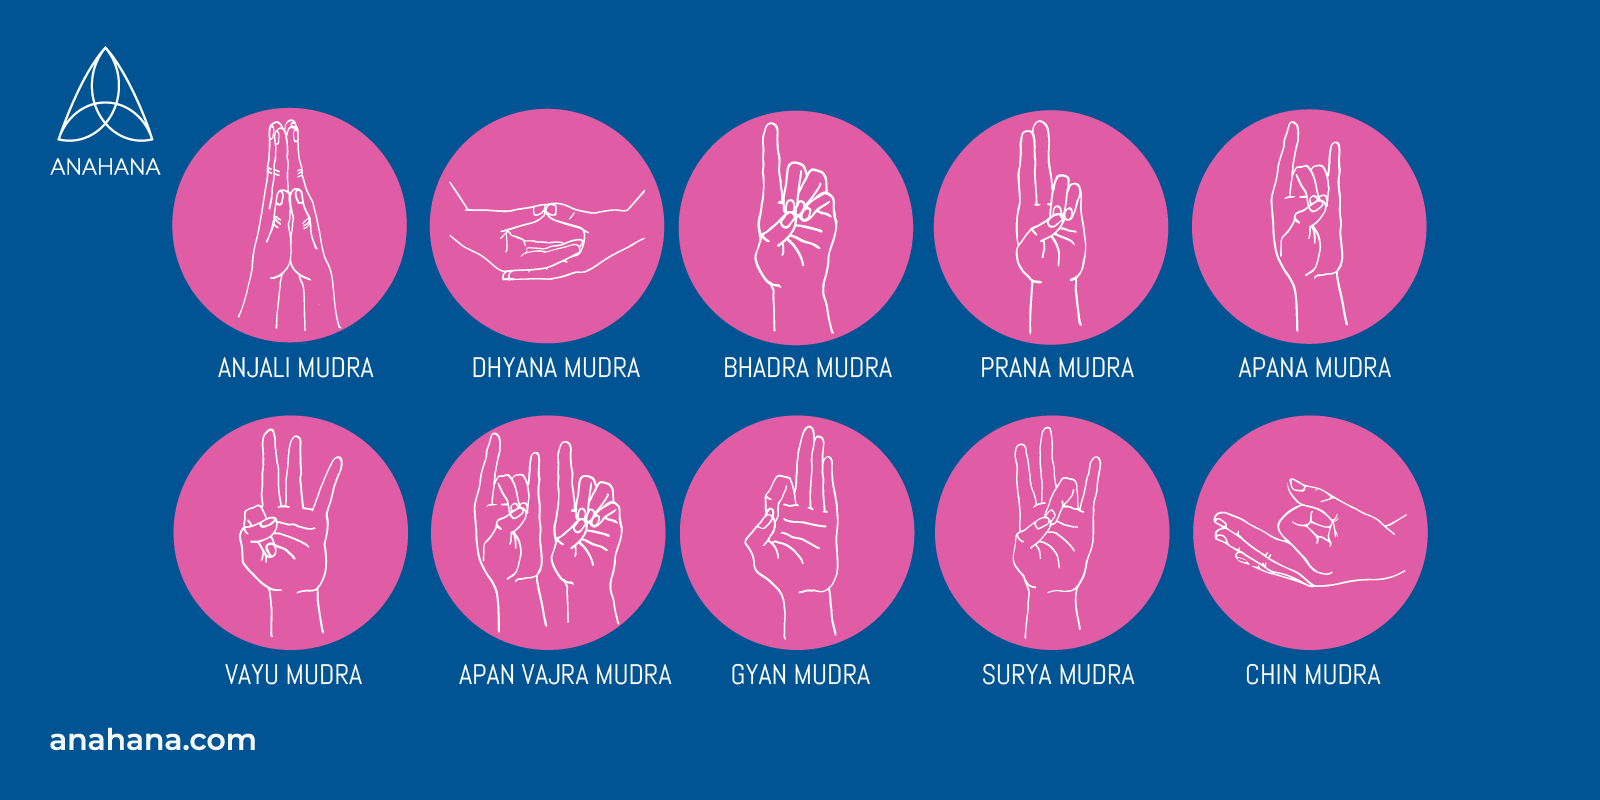 the different types of mudras